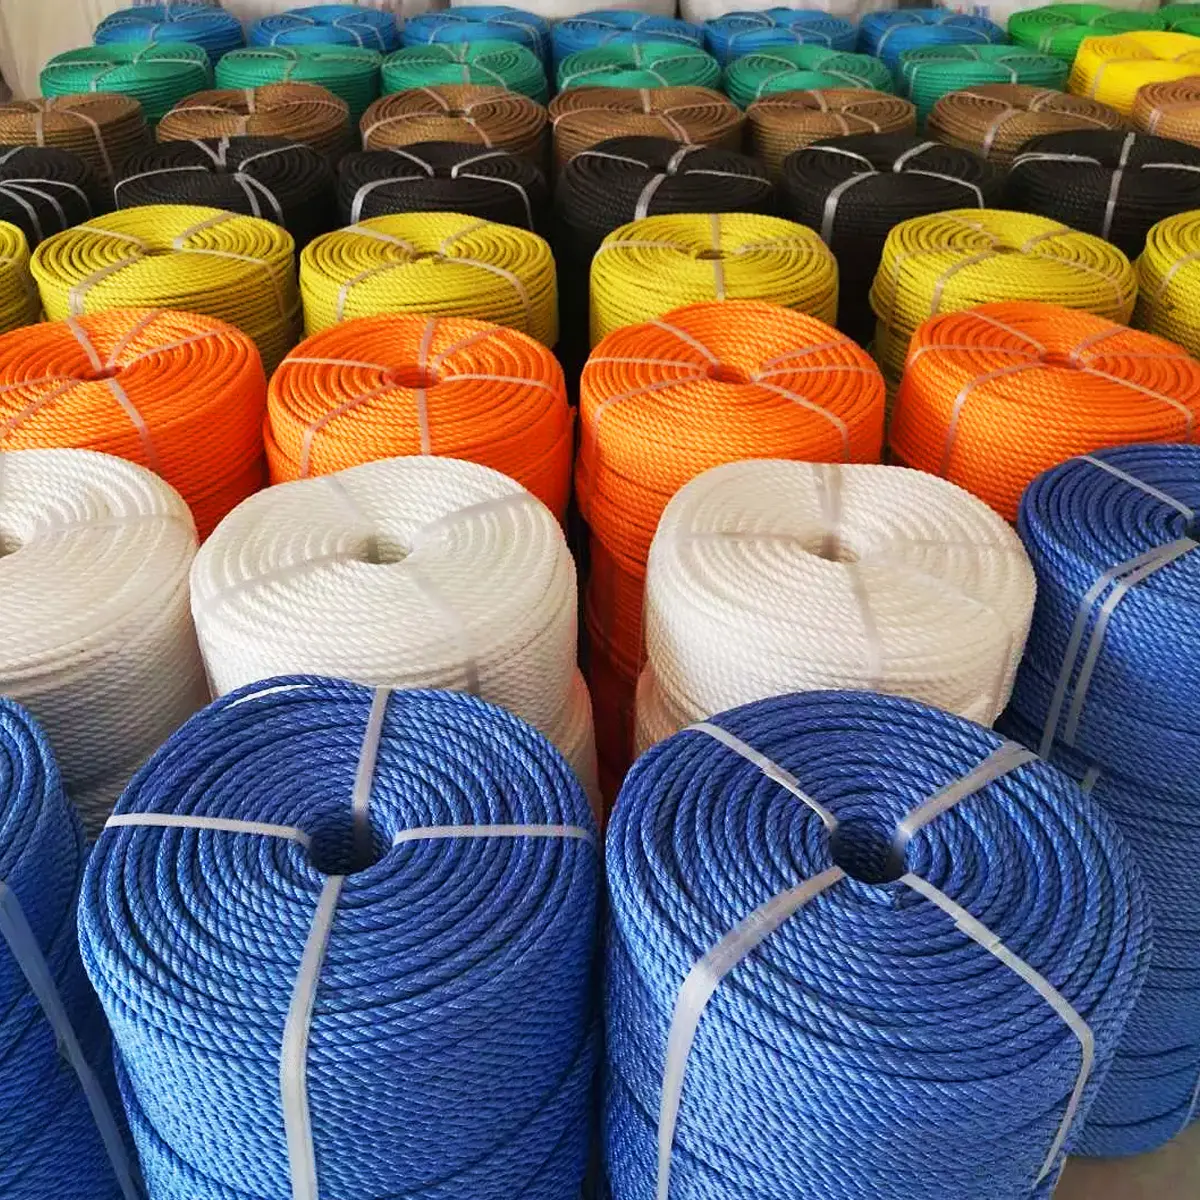 3 Strand Fiber polypropylene Braided Twisted Rope For Marine Superior Strength High Quality Hot Sale pp Rope